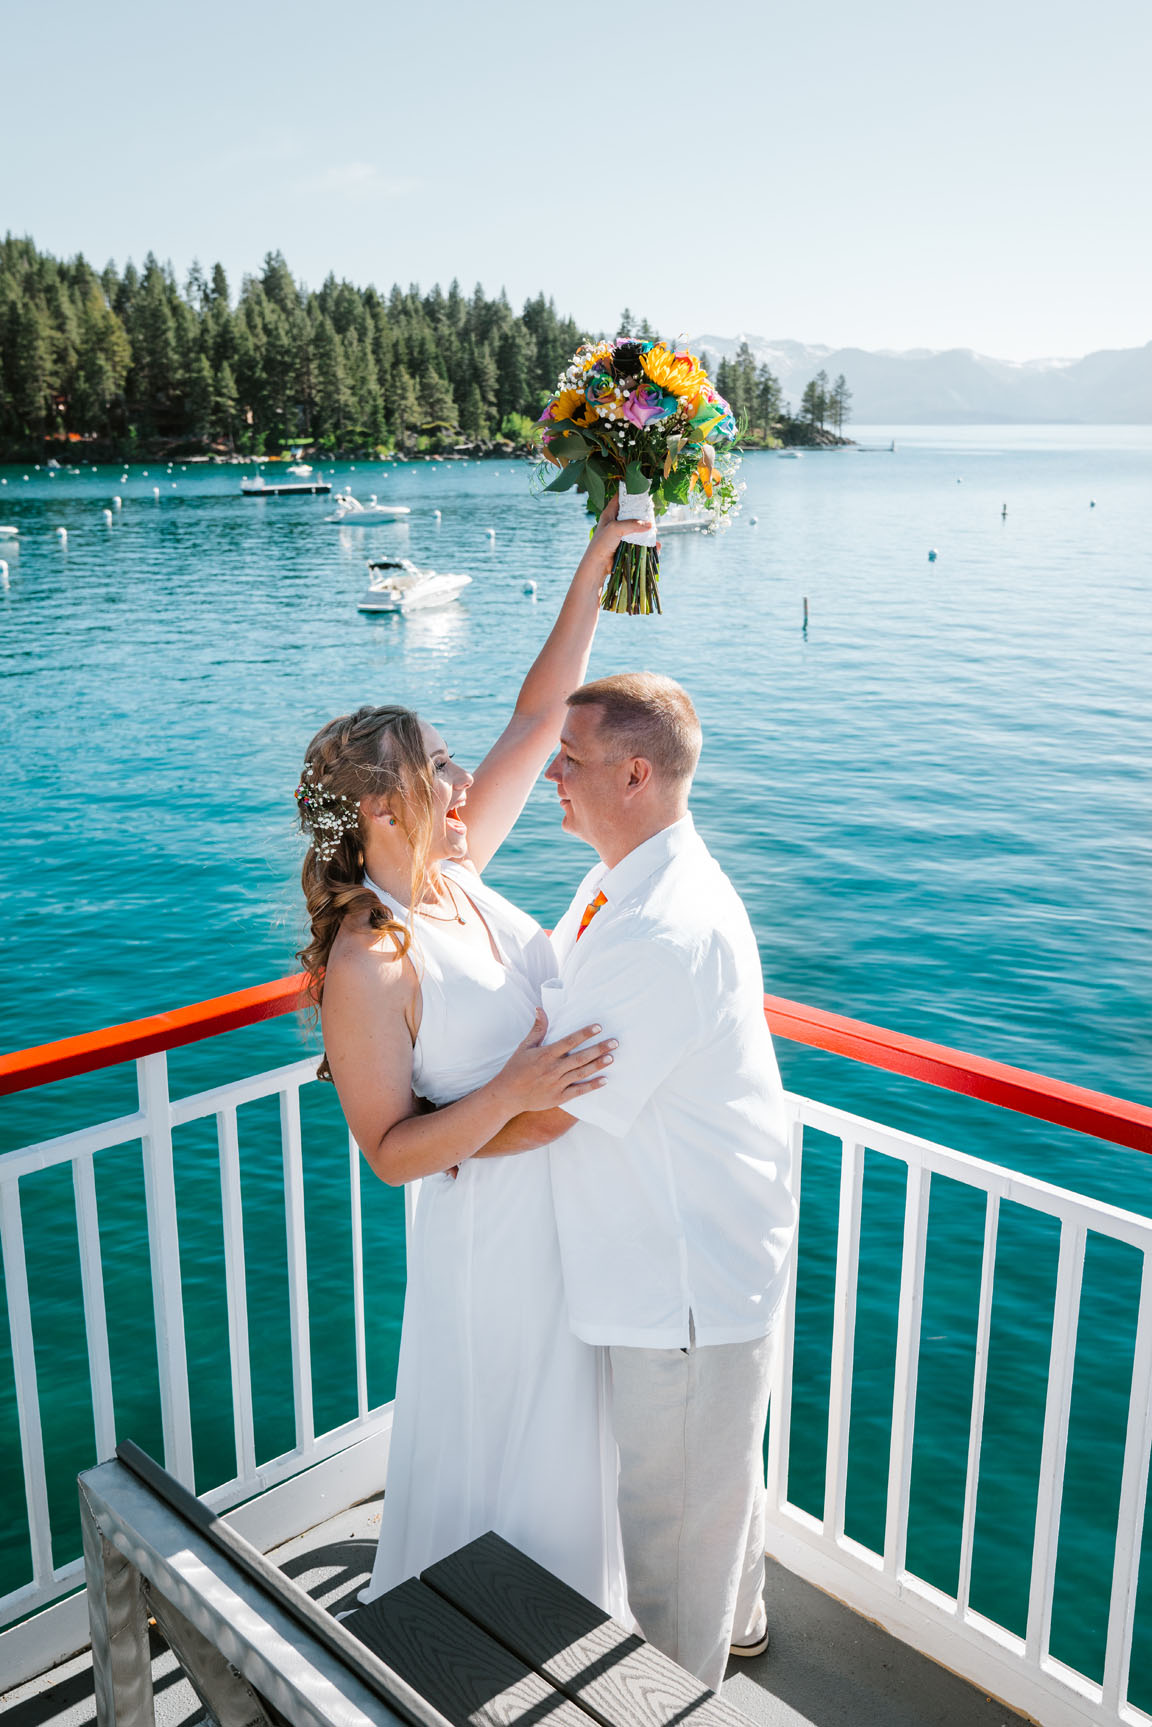 Zephyr Cove Wedding | South Lake Tahoe Wedding | Sonora Photographer | Yosemite Elopement Photographer Bessie Young